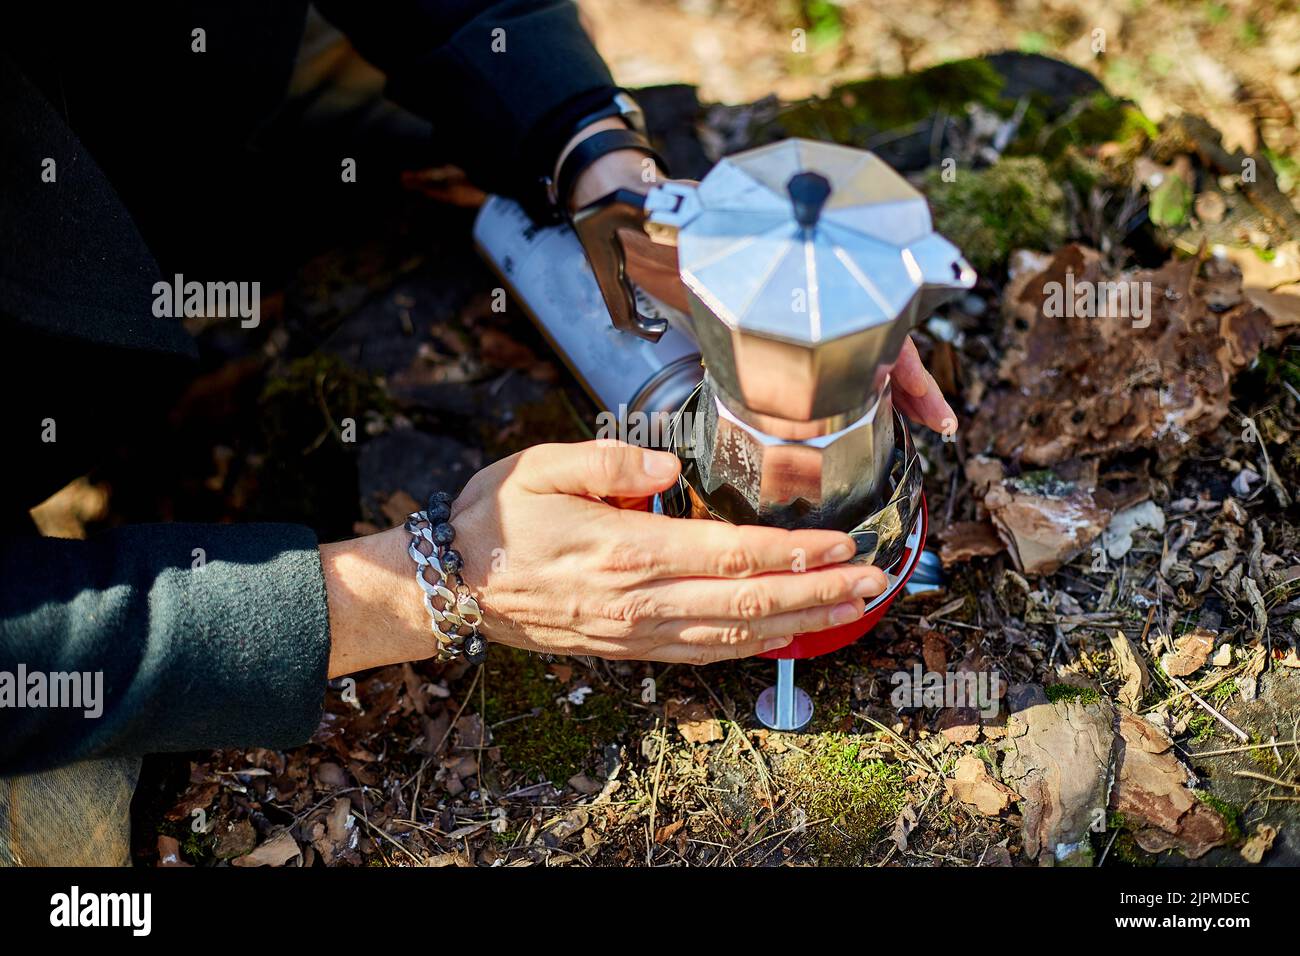 https://c8.alamy.com/comp/2JPMDEC/man-brewing-coffee-from-a-geyser-coffee-maker-on-a-gas-burner-autumn-outdoor-male-prepares-coffee-outdoors-travel-activity-for-relaxing-bushcraft-2JPMDEC.jpg